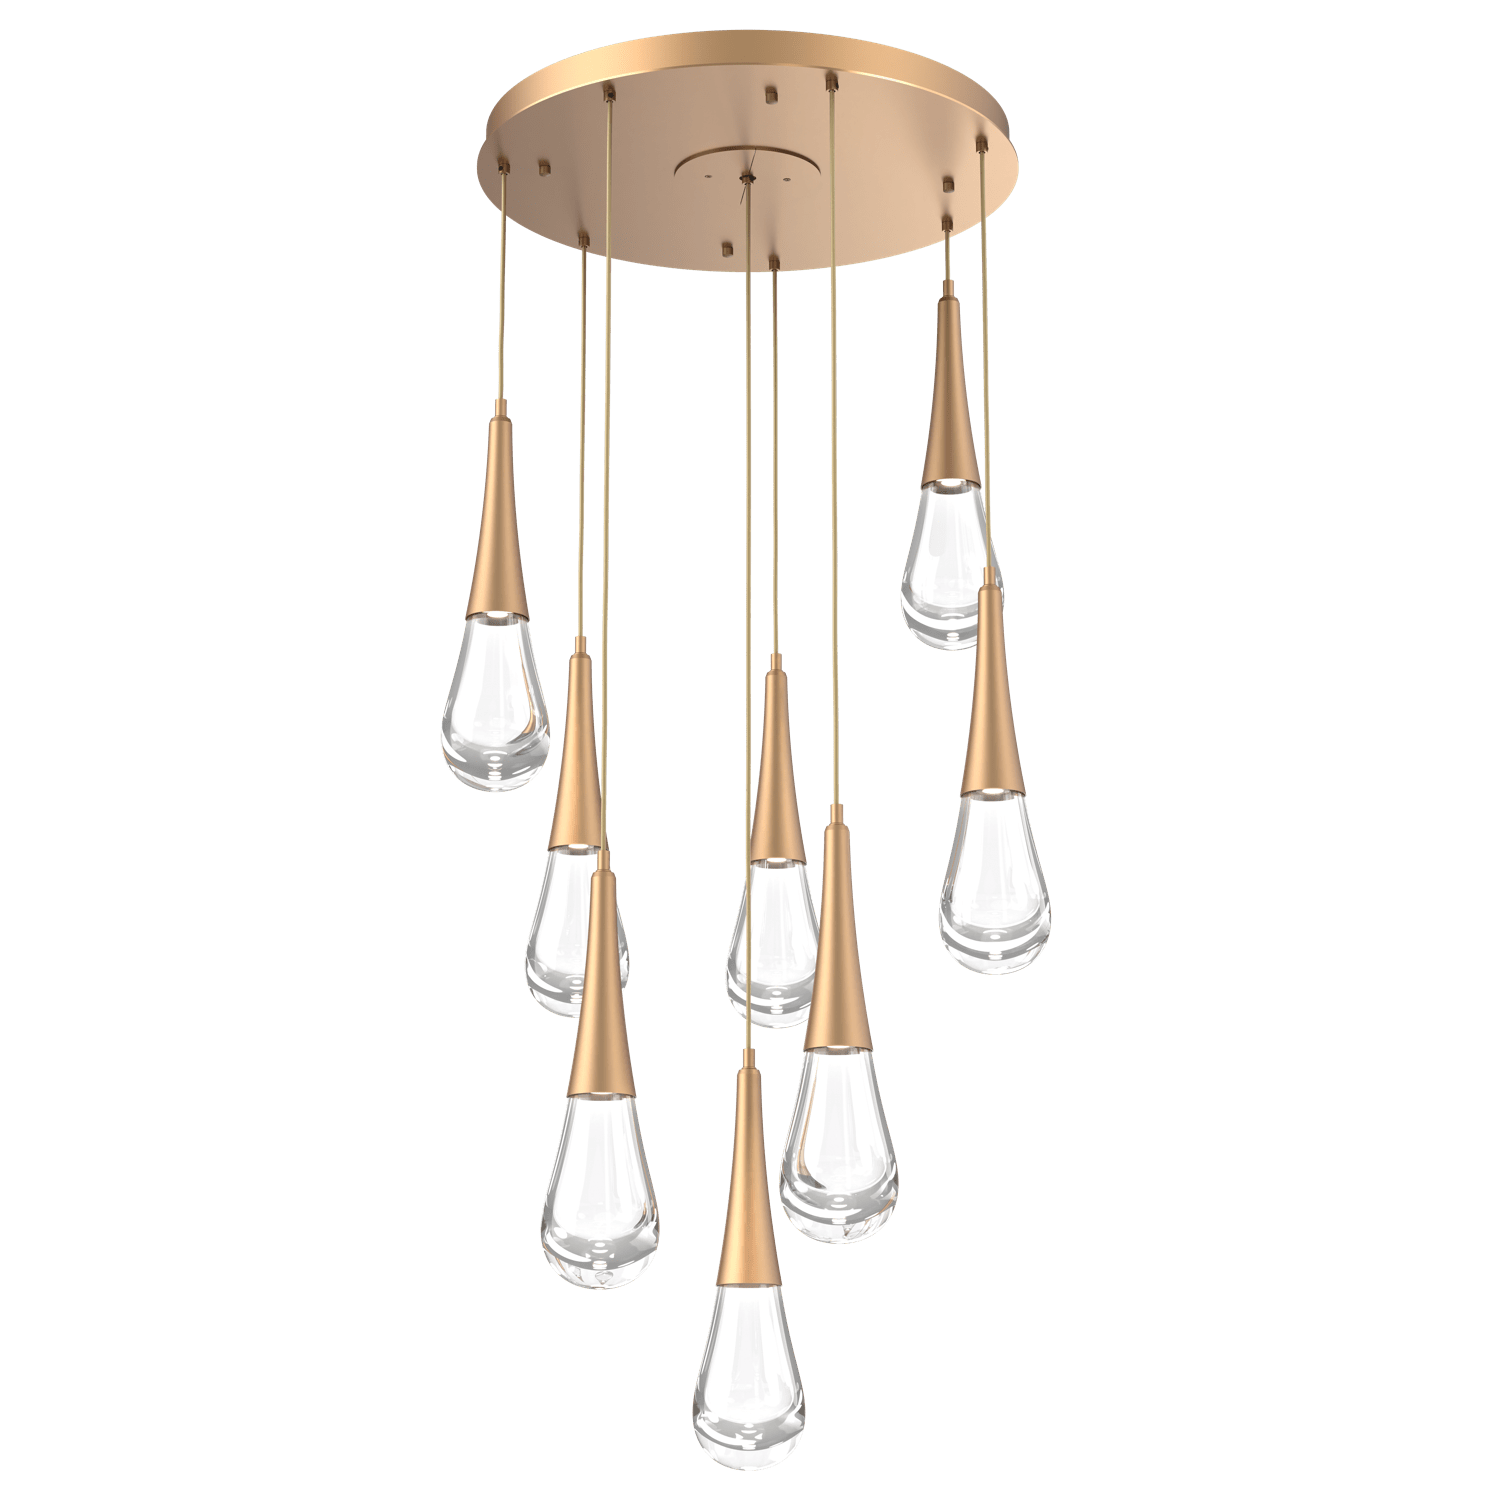 CHB0078-08-NB-Hammerton-Studio-Raindrop-8-light-round-pendant-chandelier-with-novel-brass-finish-and-clear-blown-glass-shades-and-LED-lamping